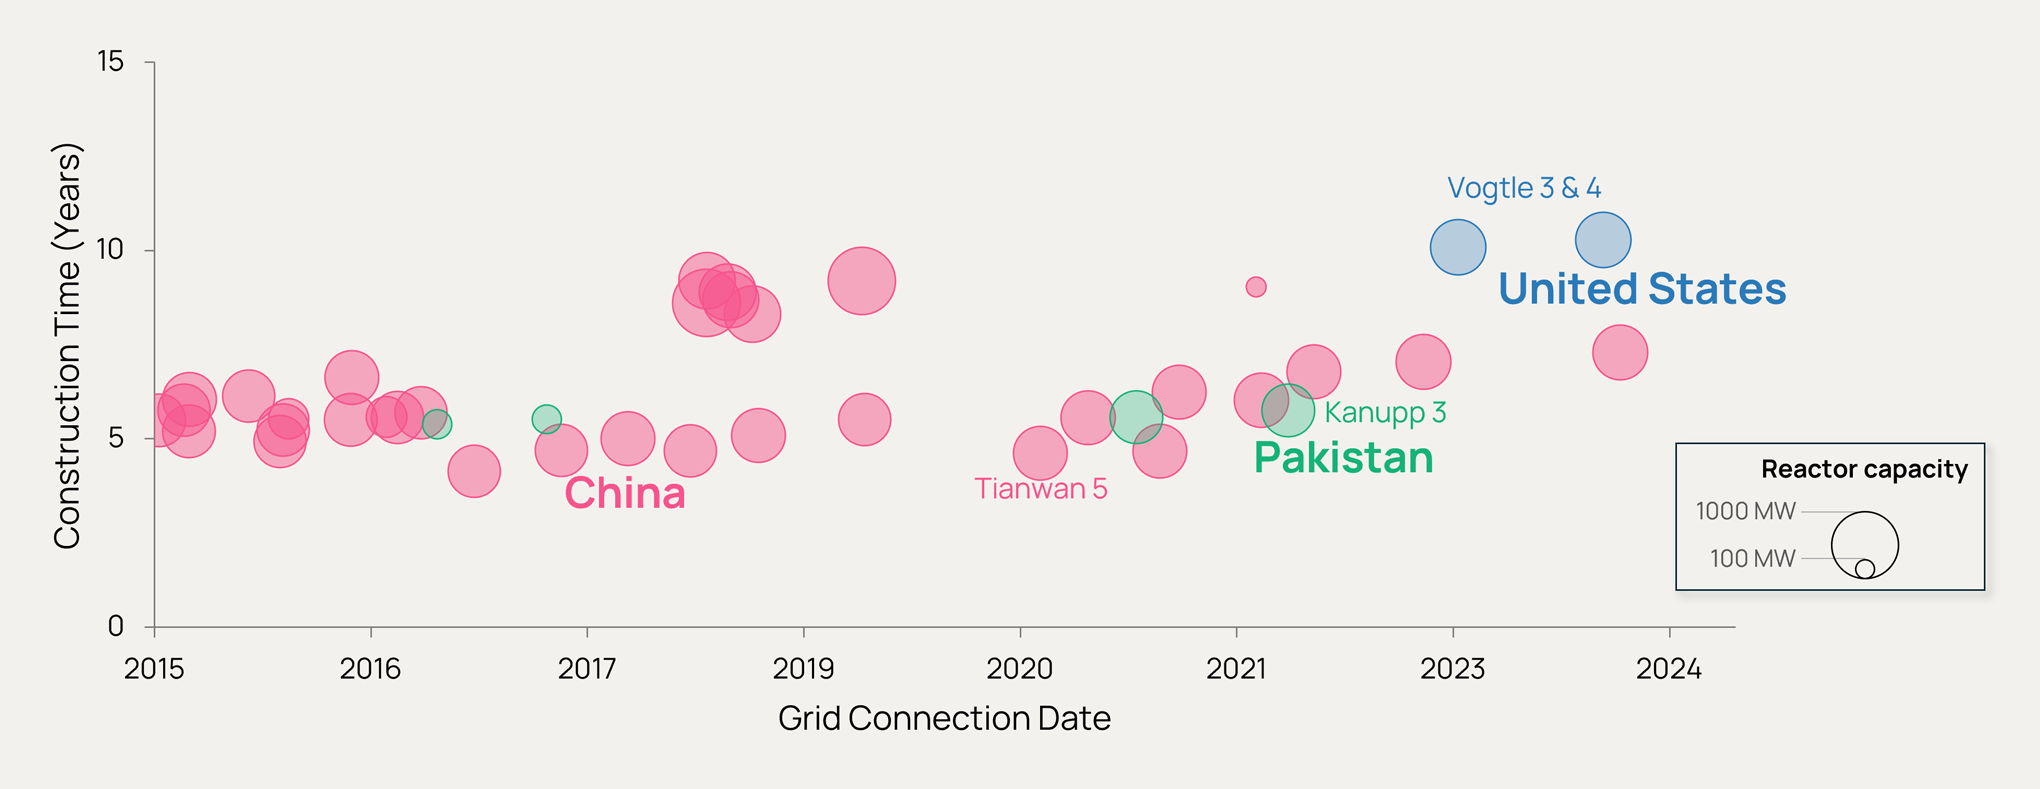 Reactor Construction Time – US, China and Pakistan